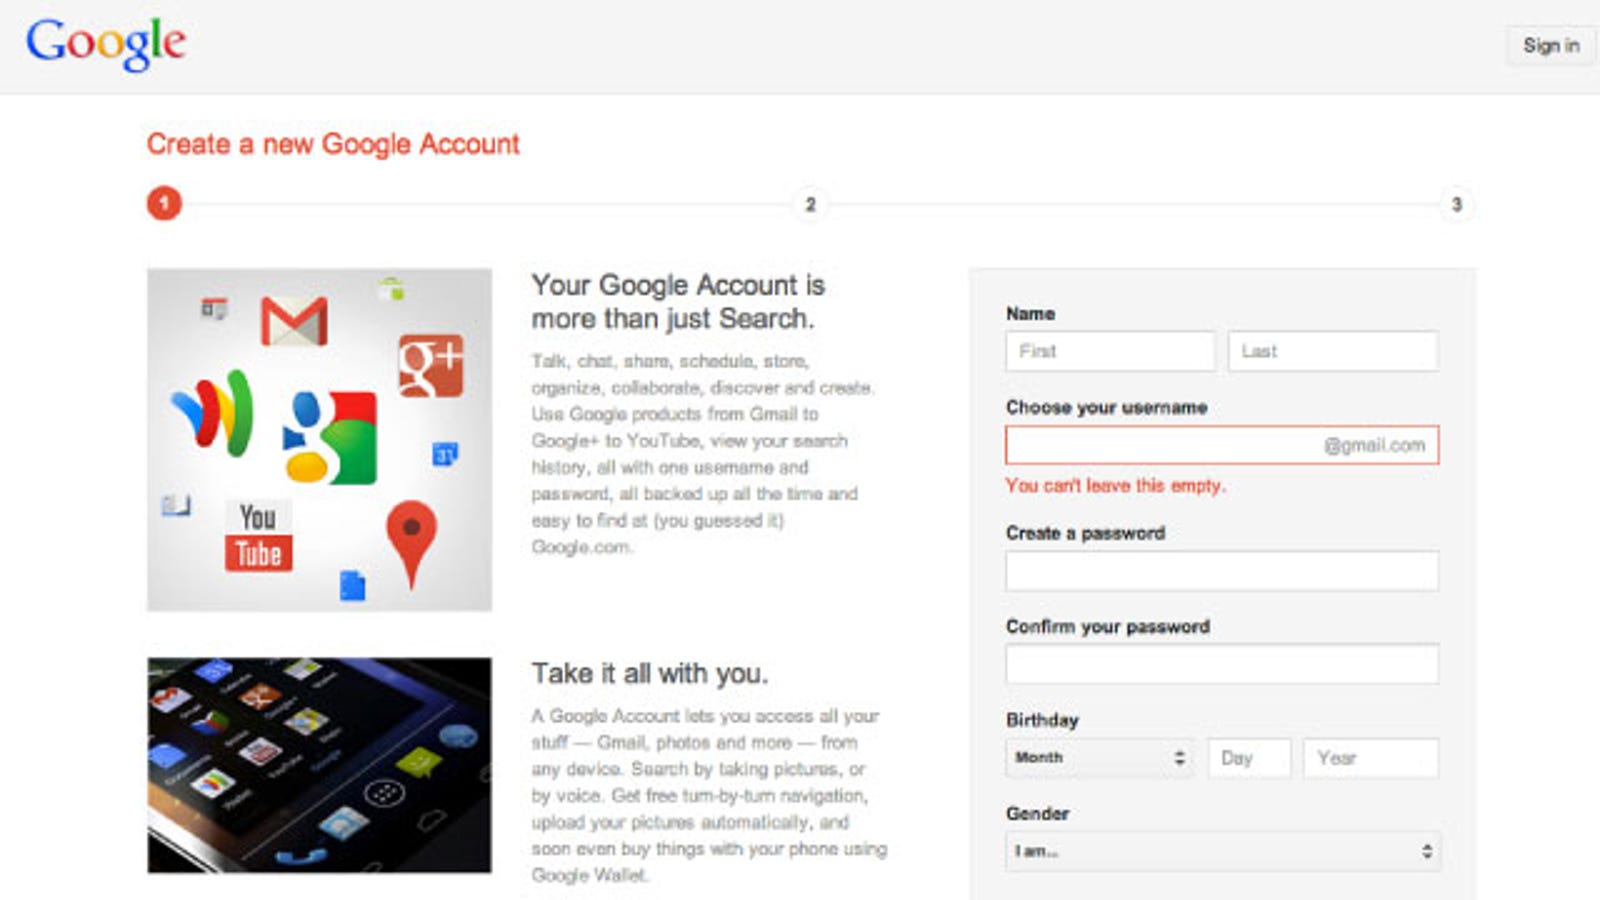 How to Sign Up for a Google Account Without Being Forced into Google+